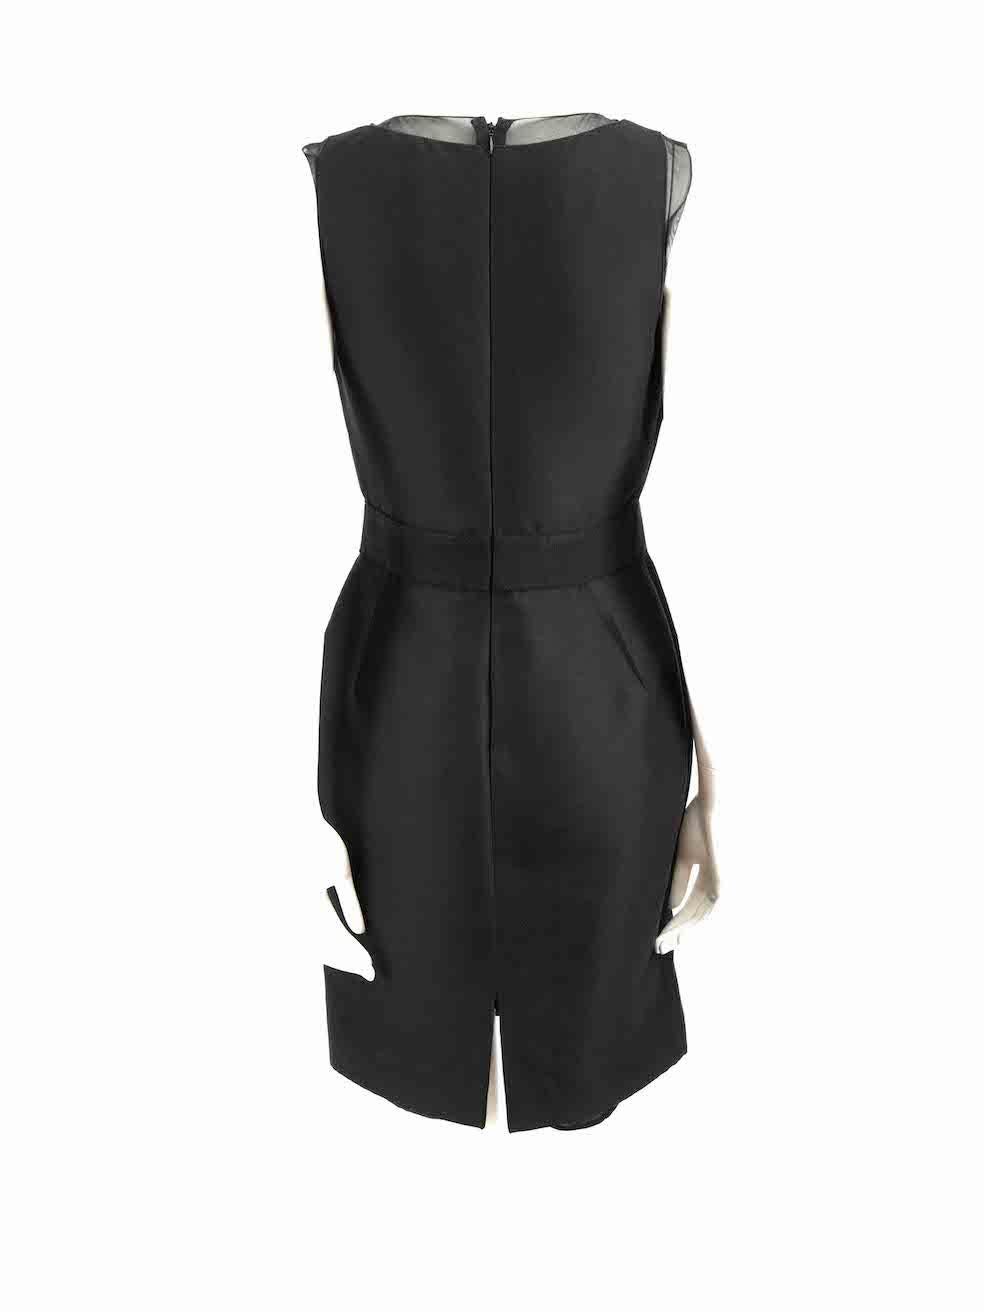 Giambattista Valli Black Sheer Panel Neck Dress Size M In Excellent Condition For Sale In London, GB